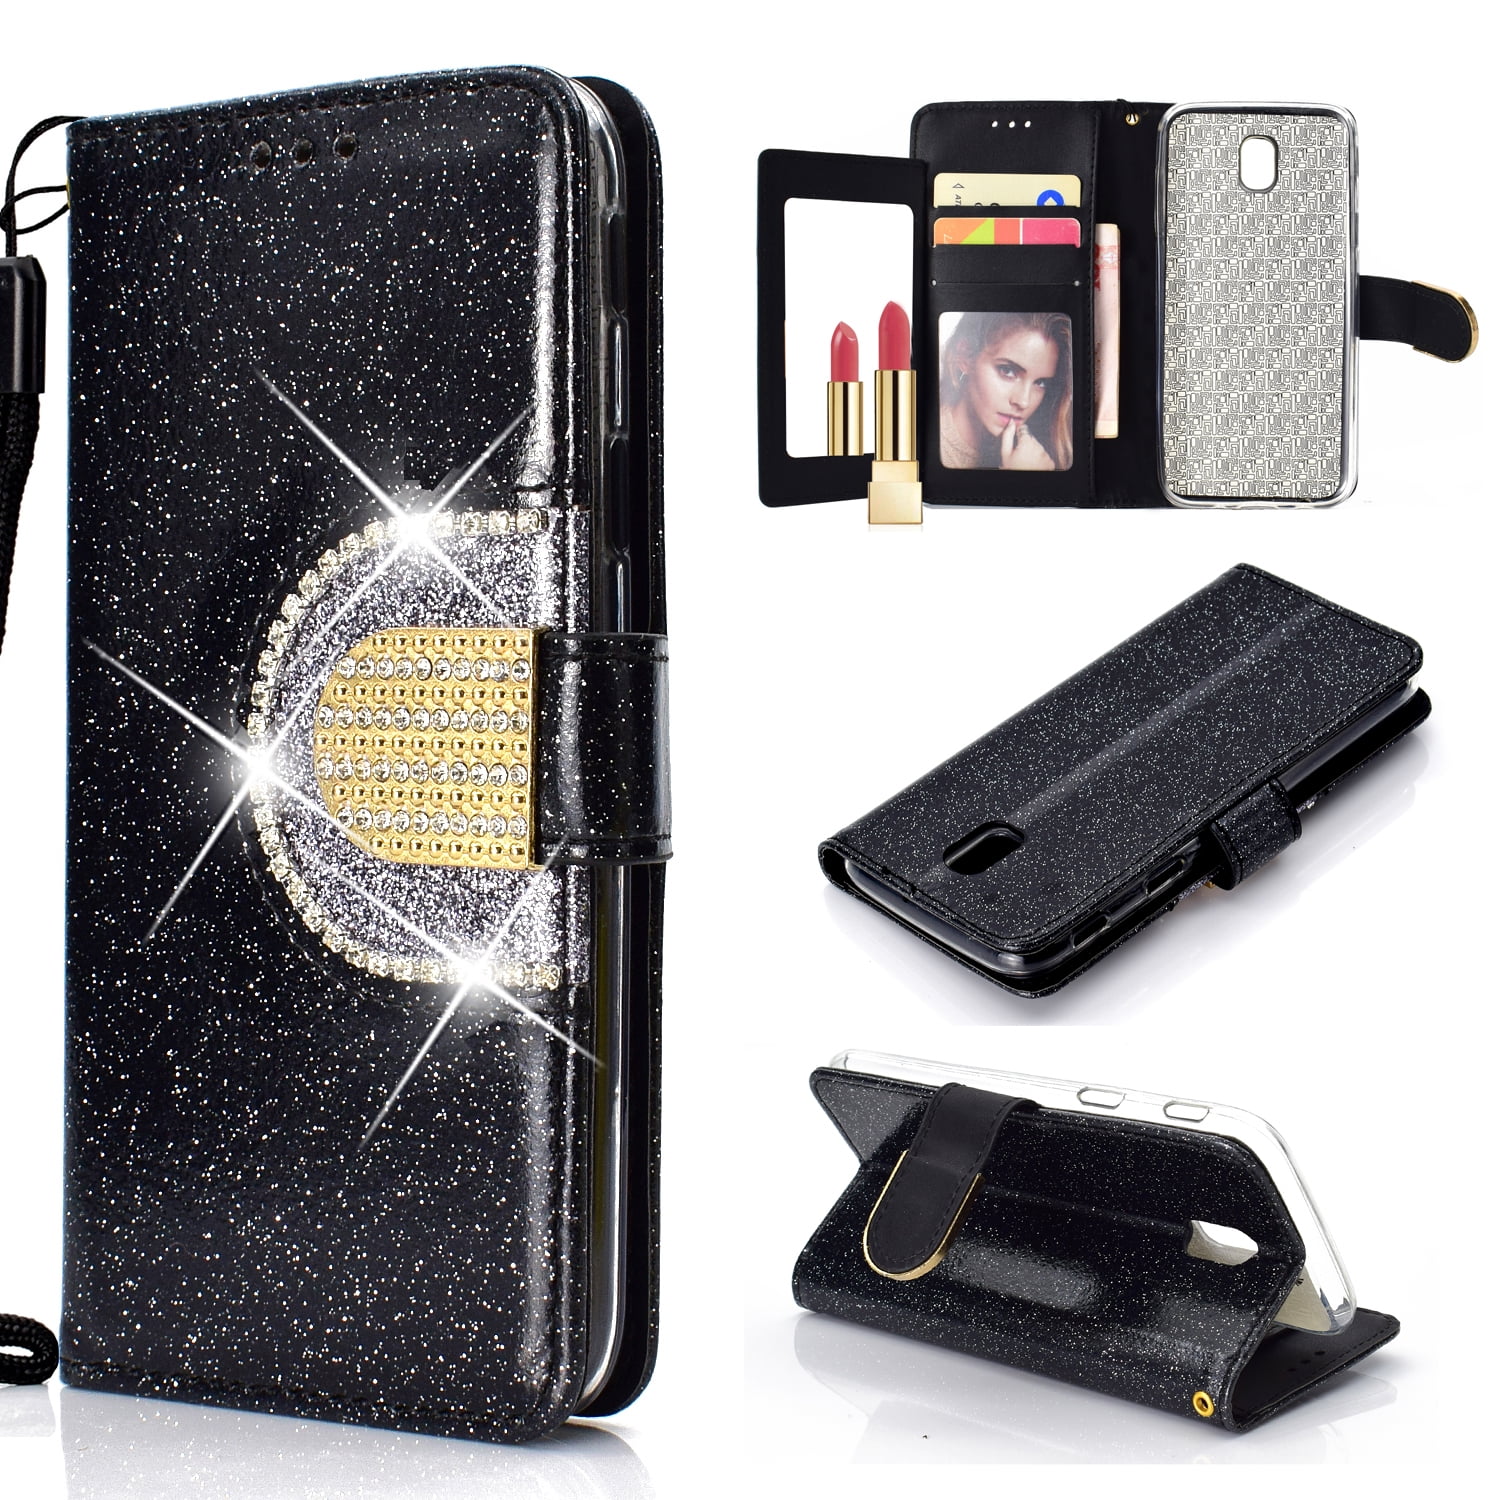 Galaxy J3 Pro 17 Case Galaxy J3 17 Eu Edition J330 Case Allytech Glitter Pu Leather Stand Protective Cover With Mirror Diamond Buckle Magnetic Clasp Soft Tpu Back Phone Case Black Walmart Com